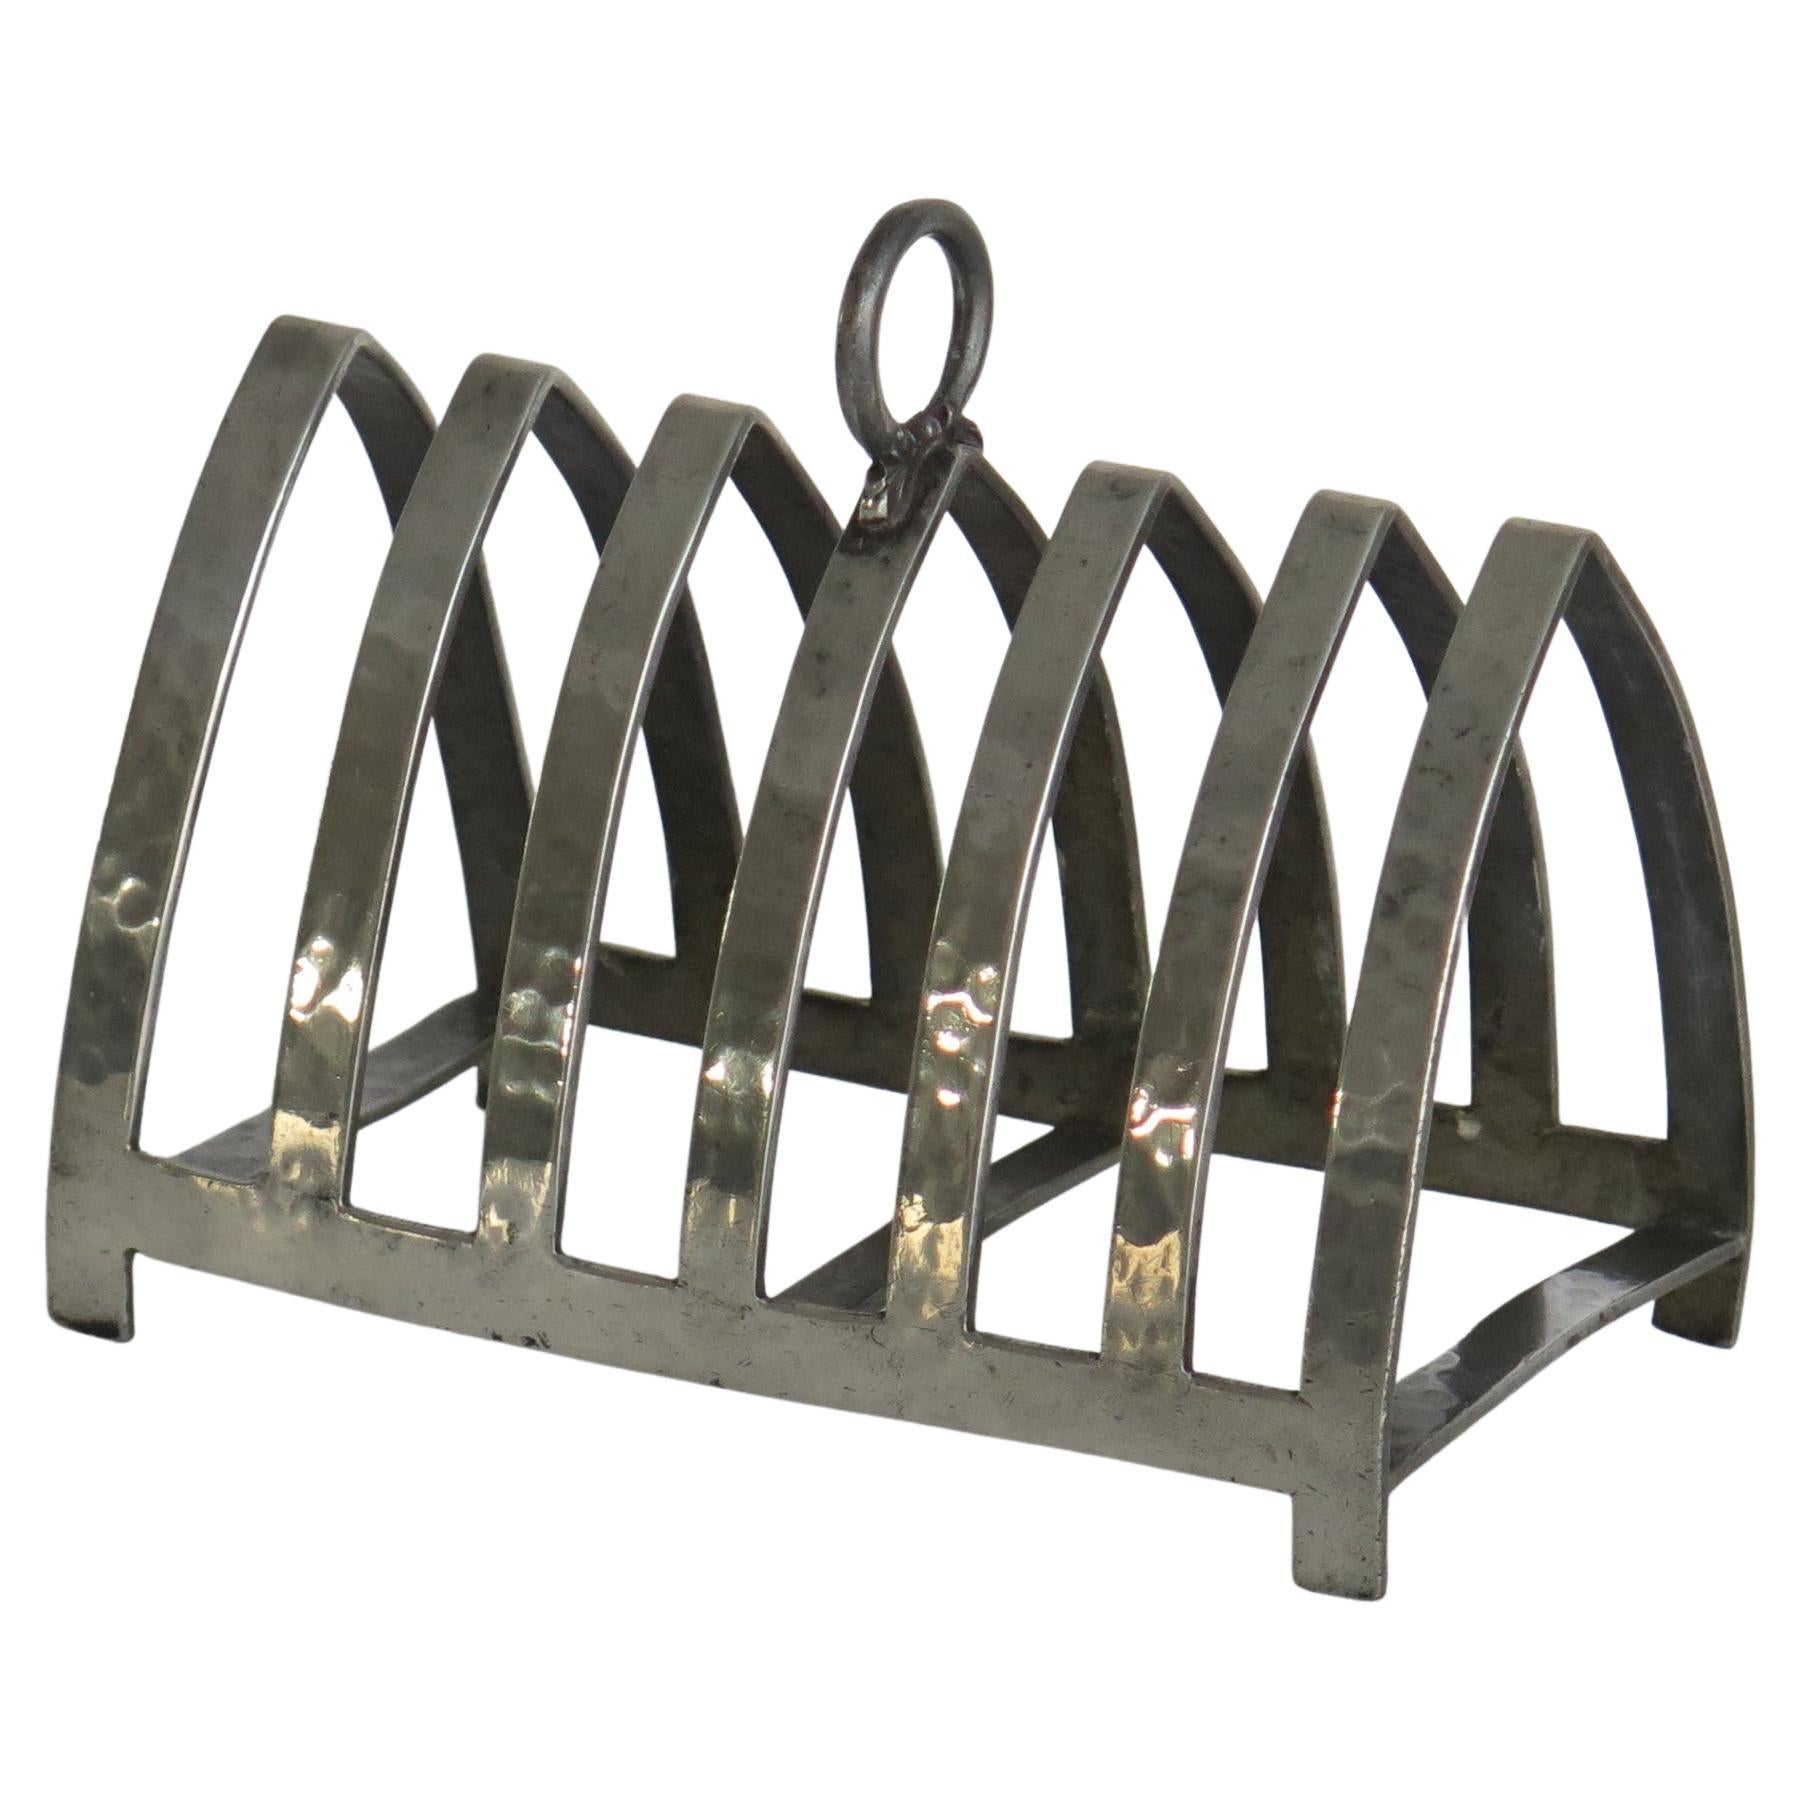 Art Deco Hammered Pewter Letter Rack by Connells of London, circa 1925